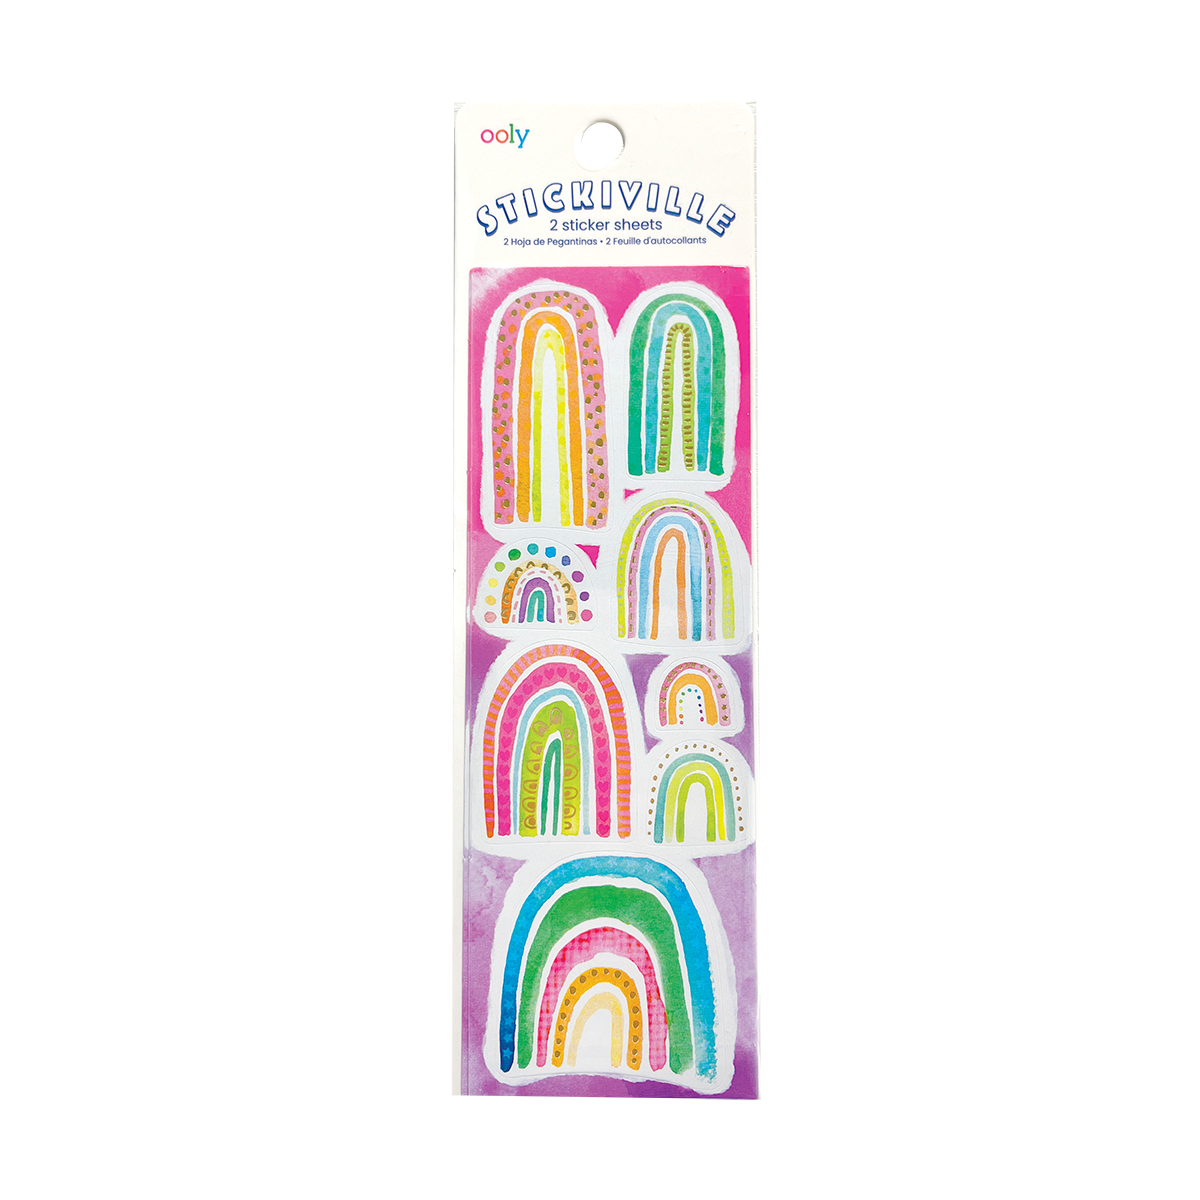 OOLY Stickiville Watercolor Rainbows Stickers inside packaging